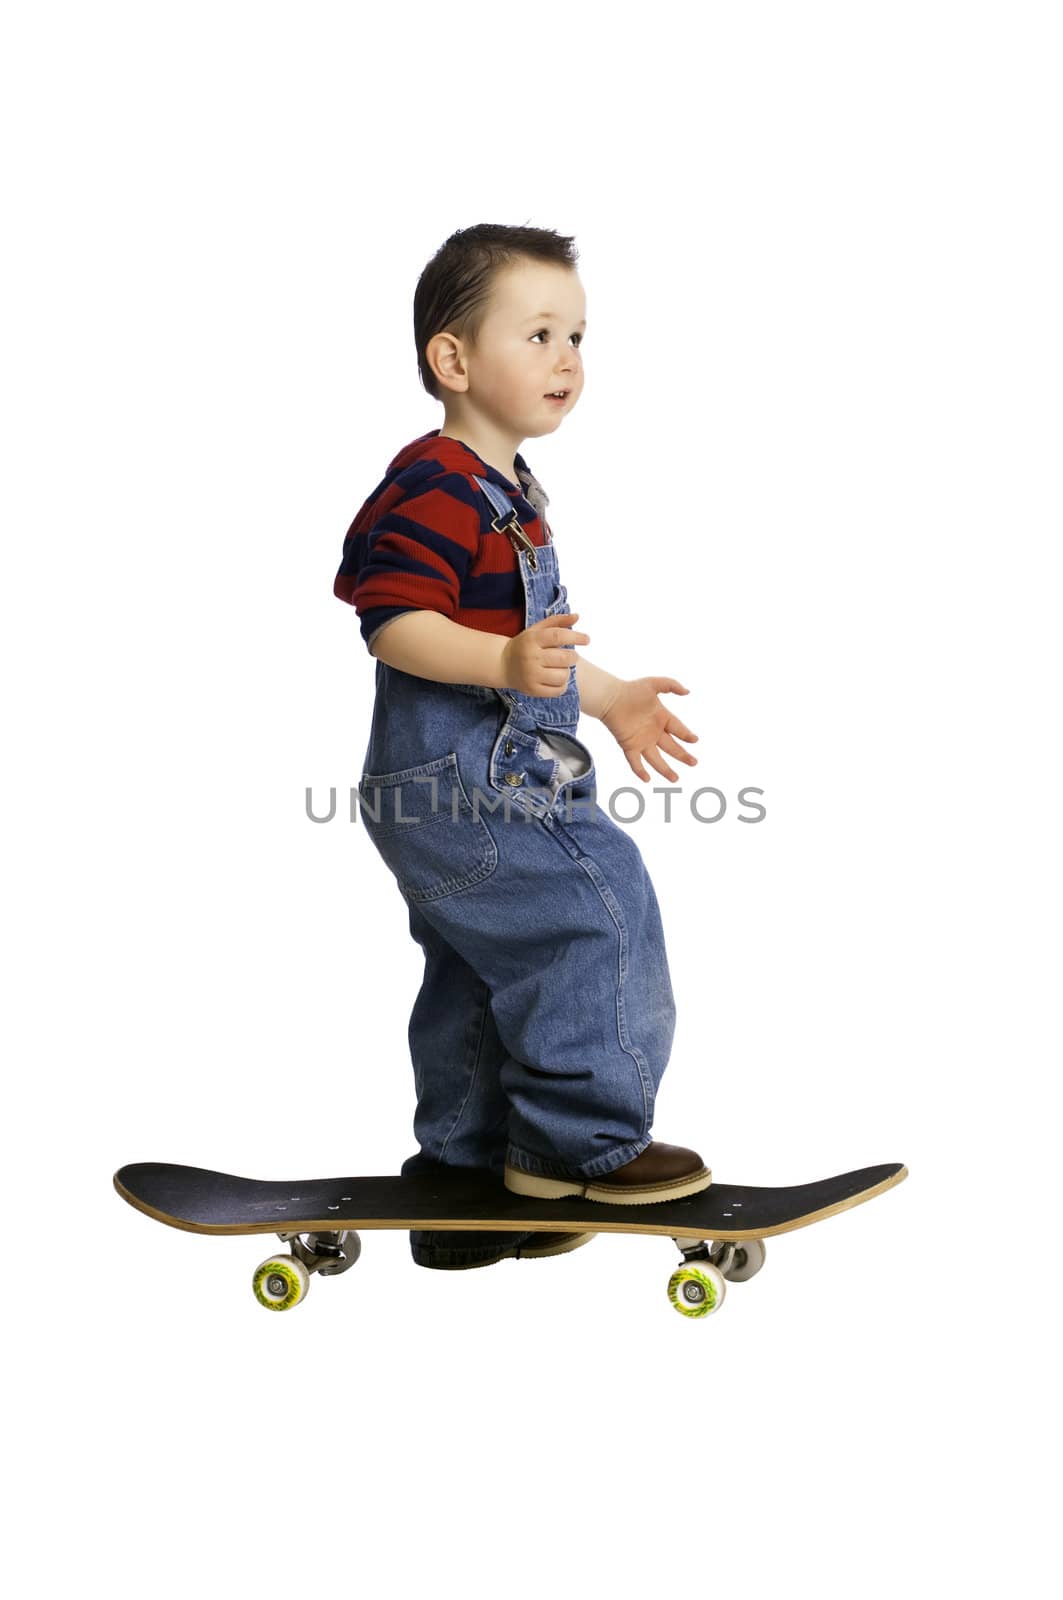 Baby riding a skateboard by rcarner